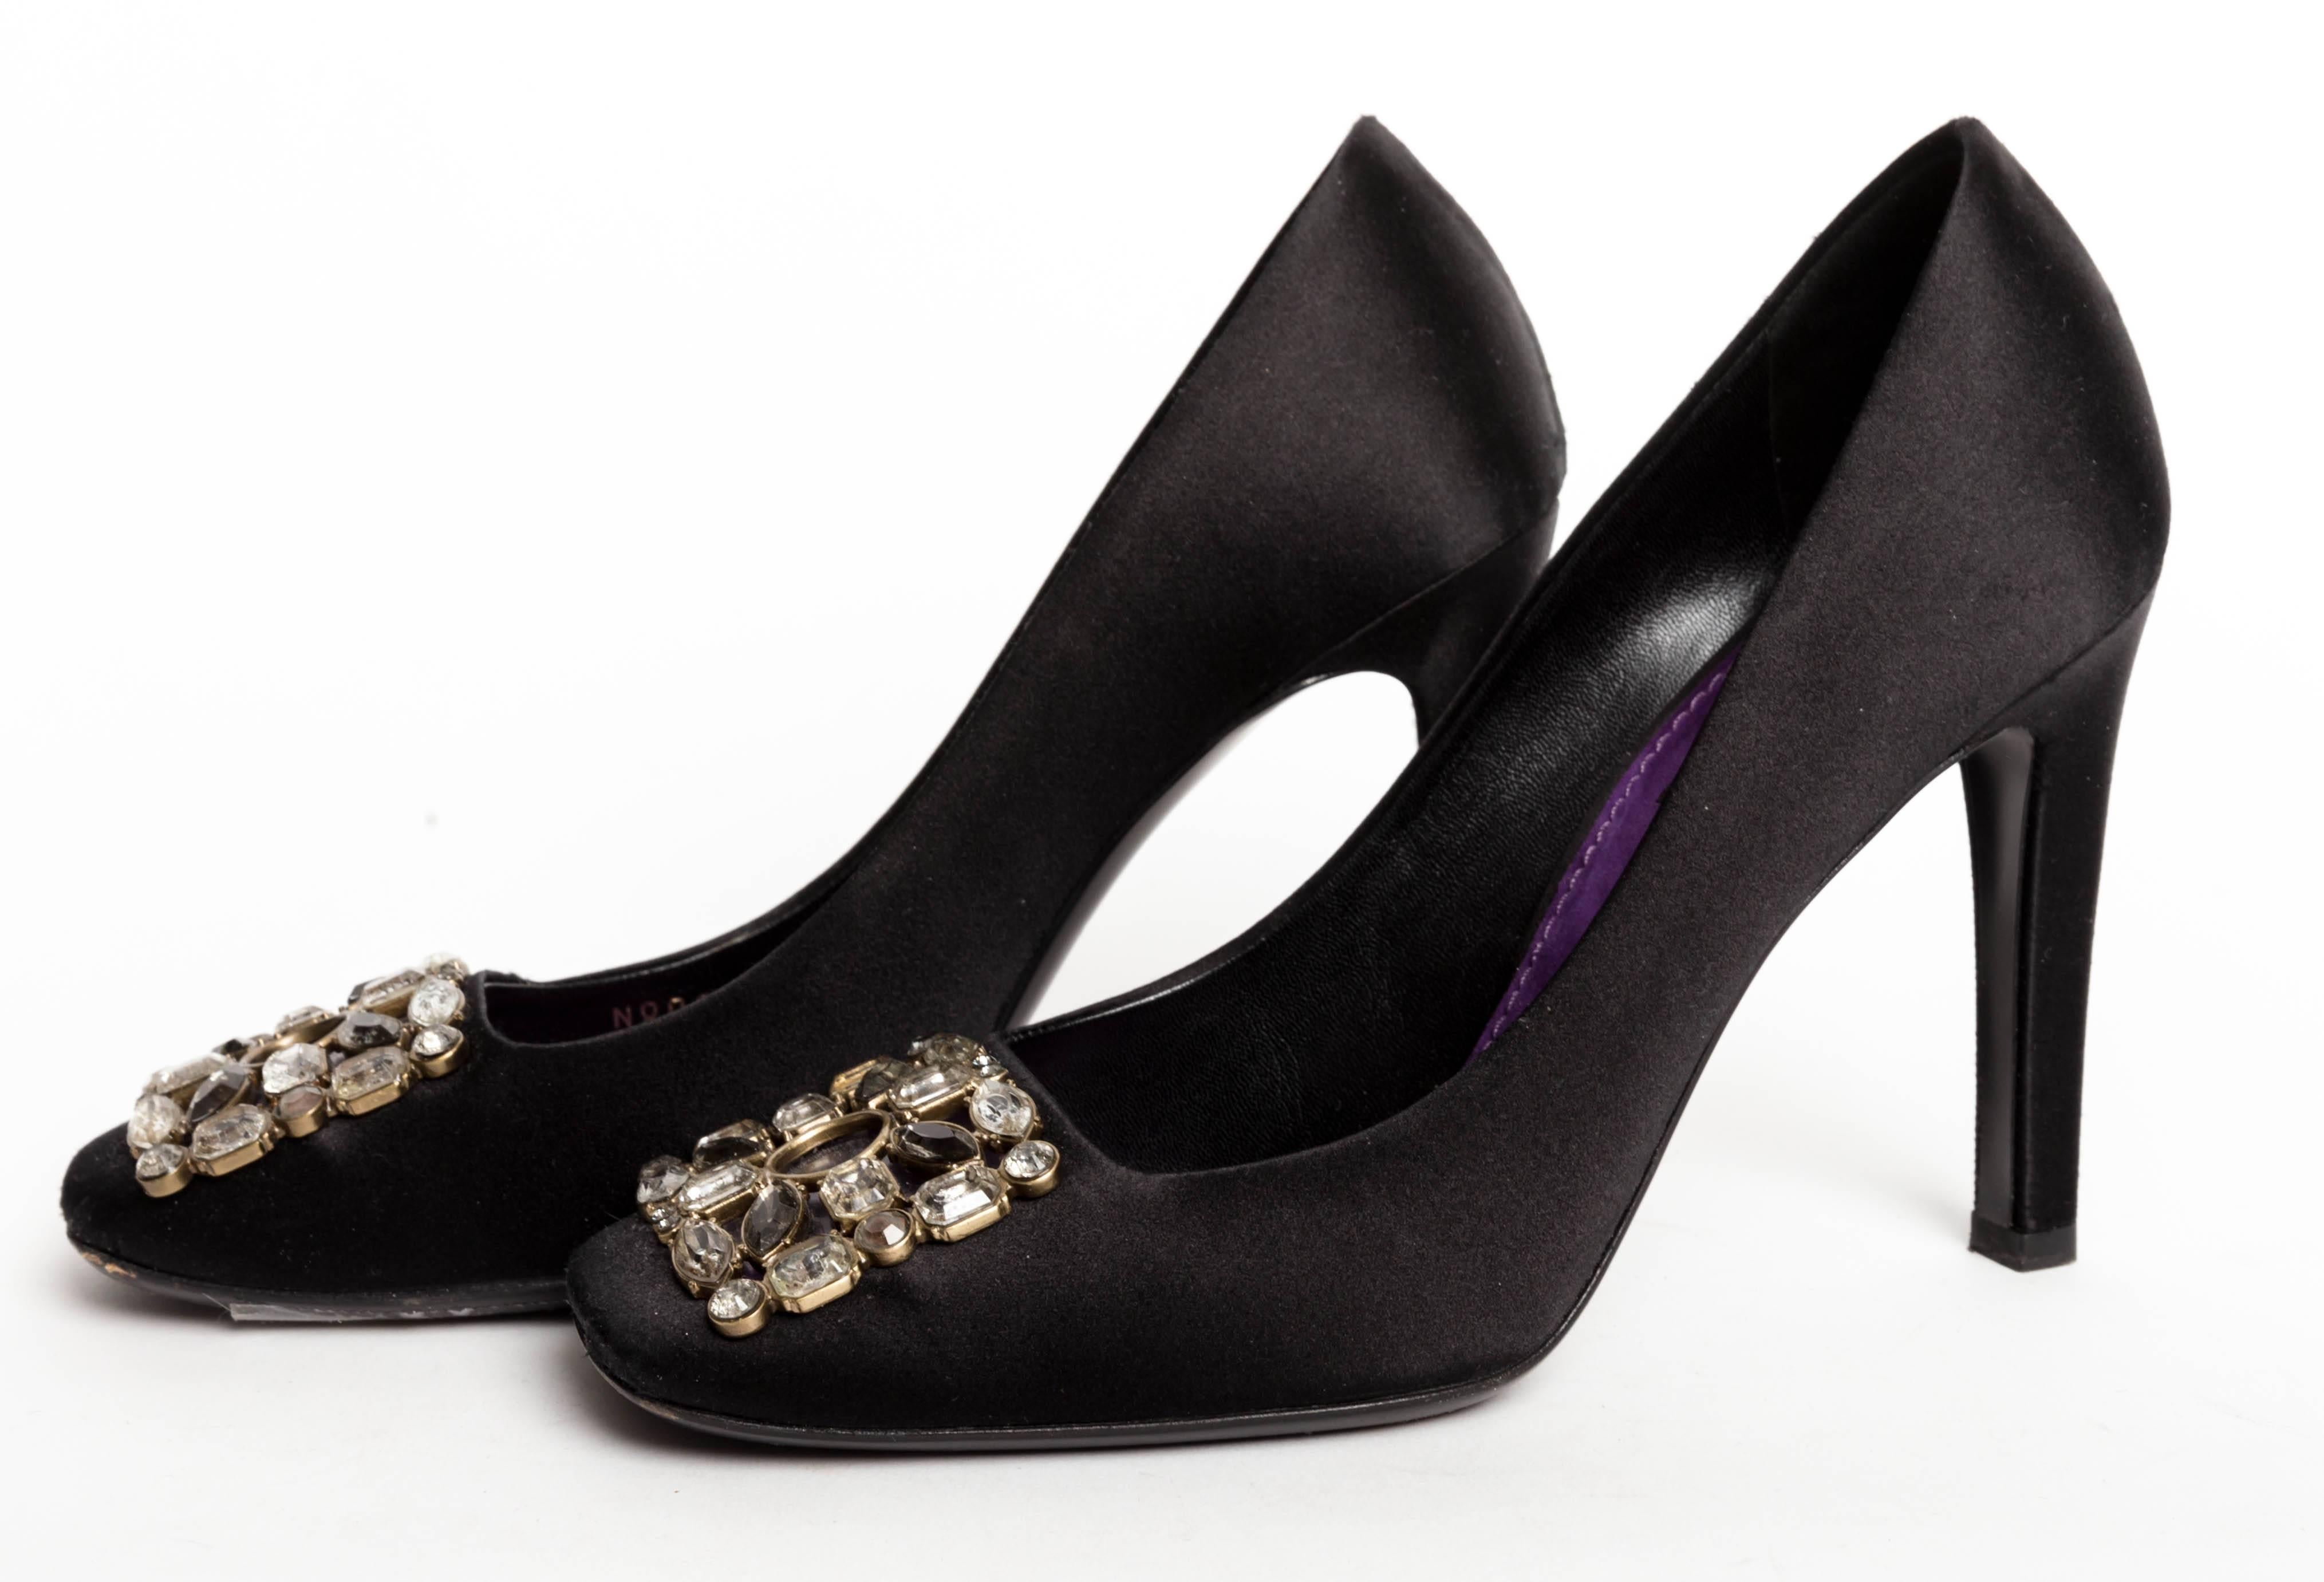 Women's Louis Vuitton Black Silk Pumps with Jeweled Buckles - 37 1/2